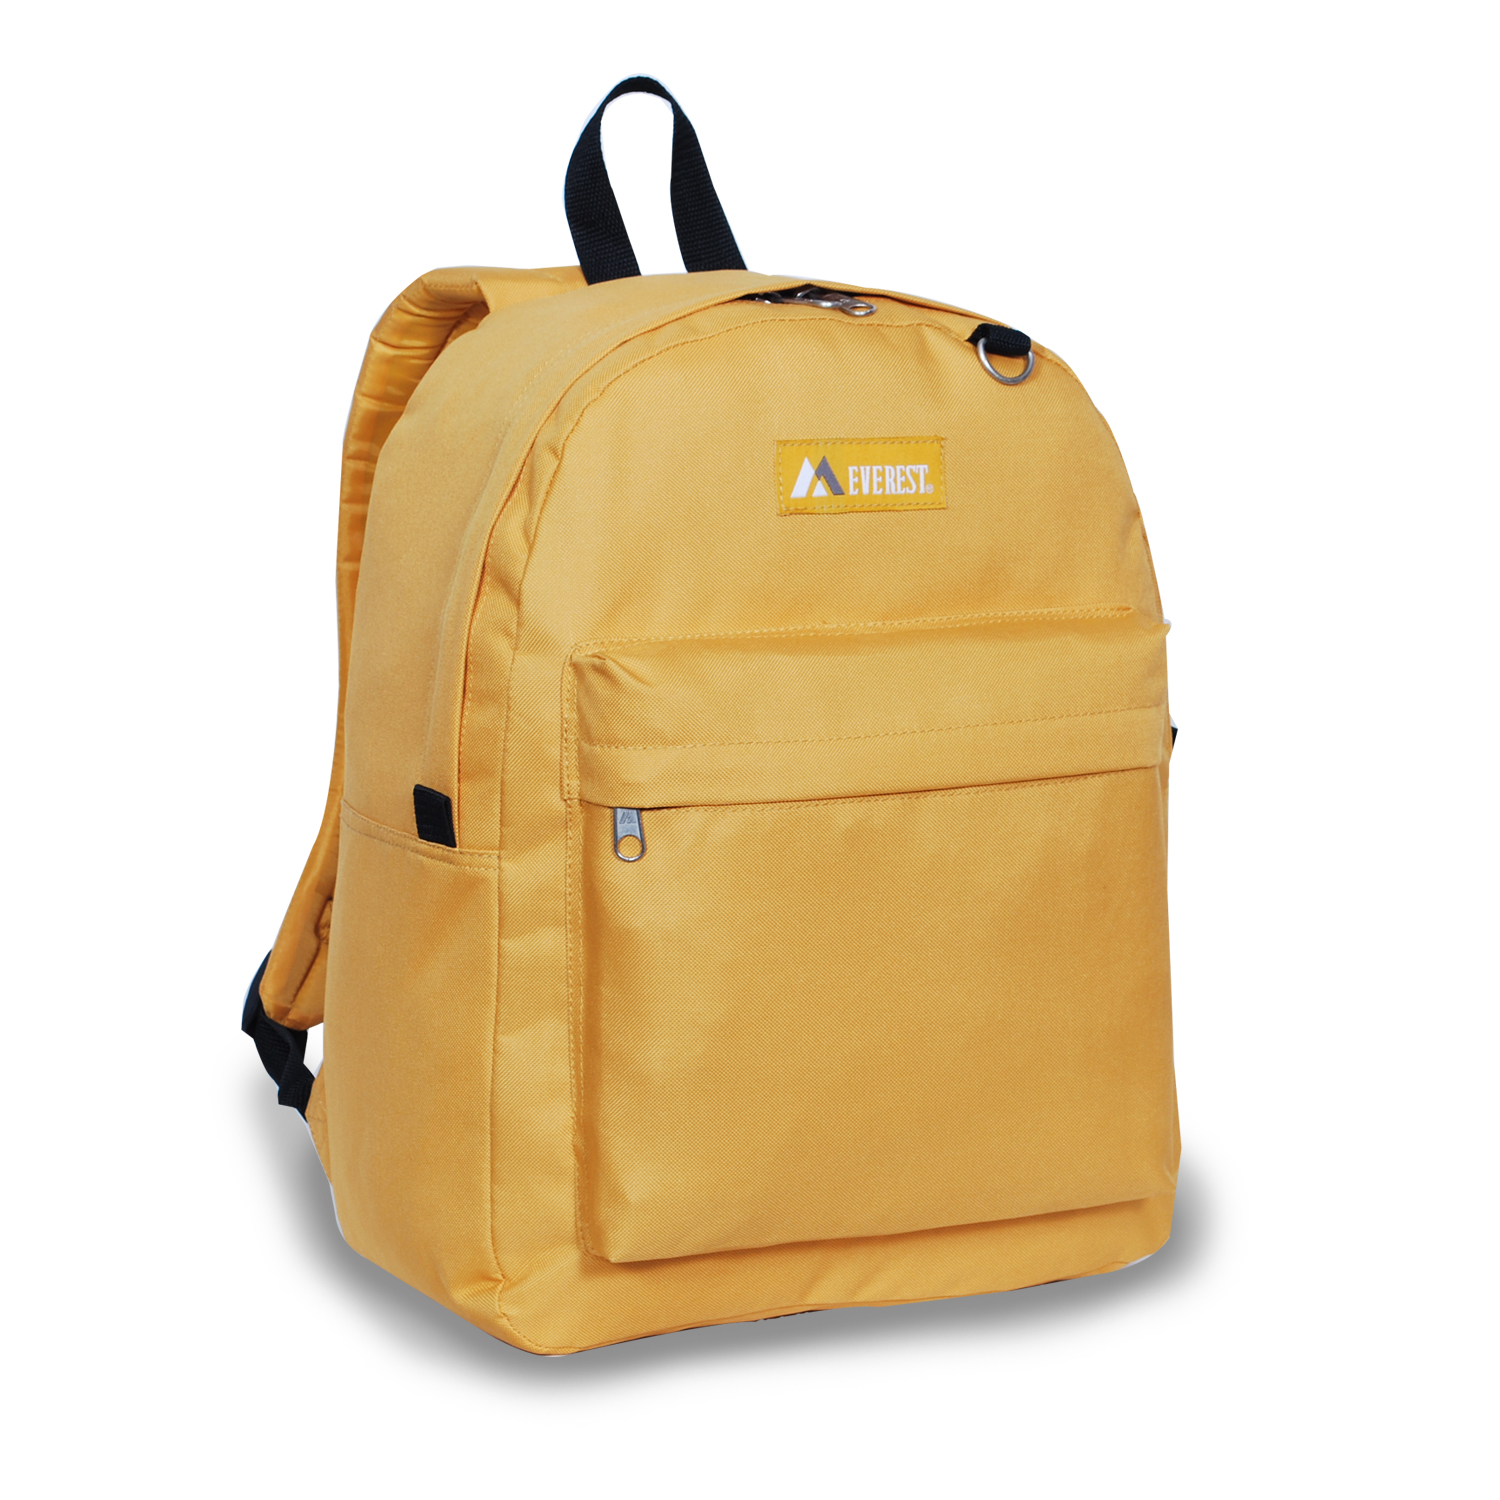 Everest 16.5" Classic Backpack, Yellow All Ages, Unisex 2045CR-YE, Carrier and Shoulder Book Bag for School, Work, Sports, and Travel - image 1 of 2